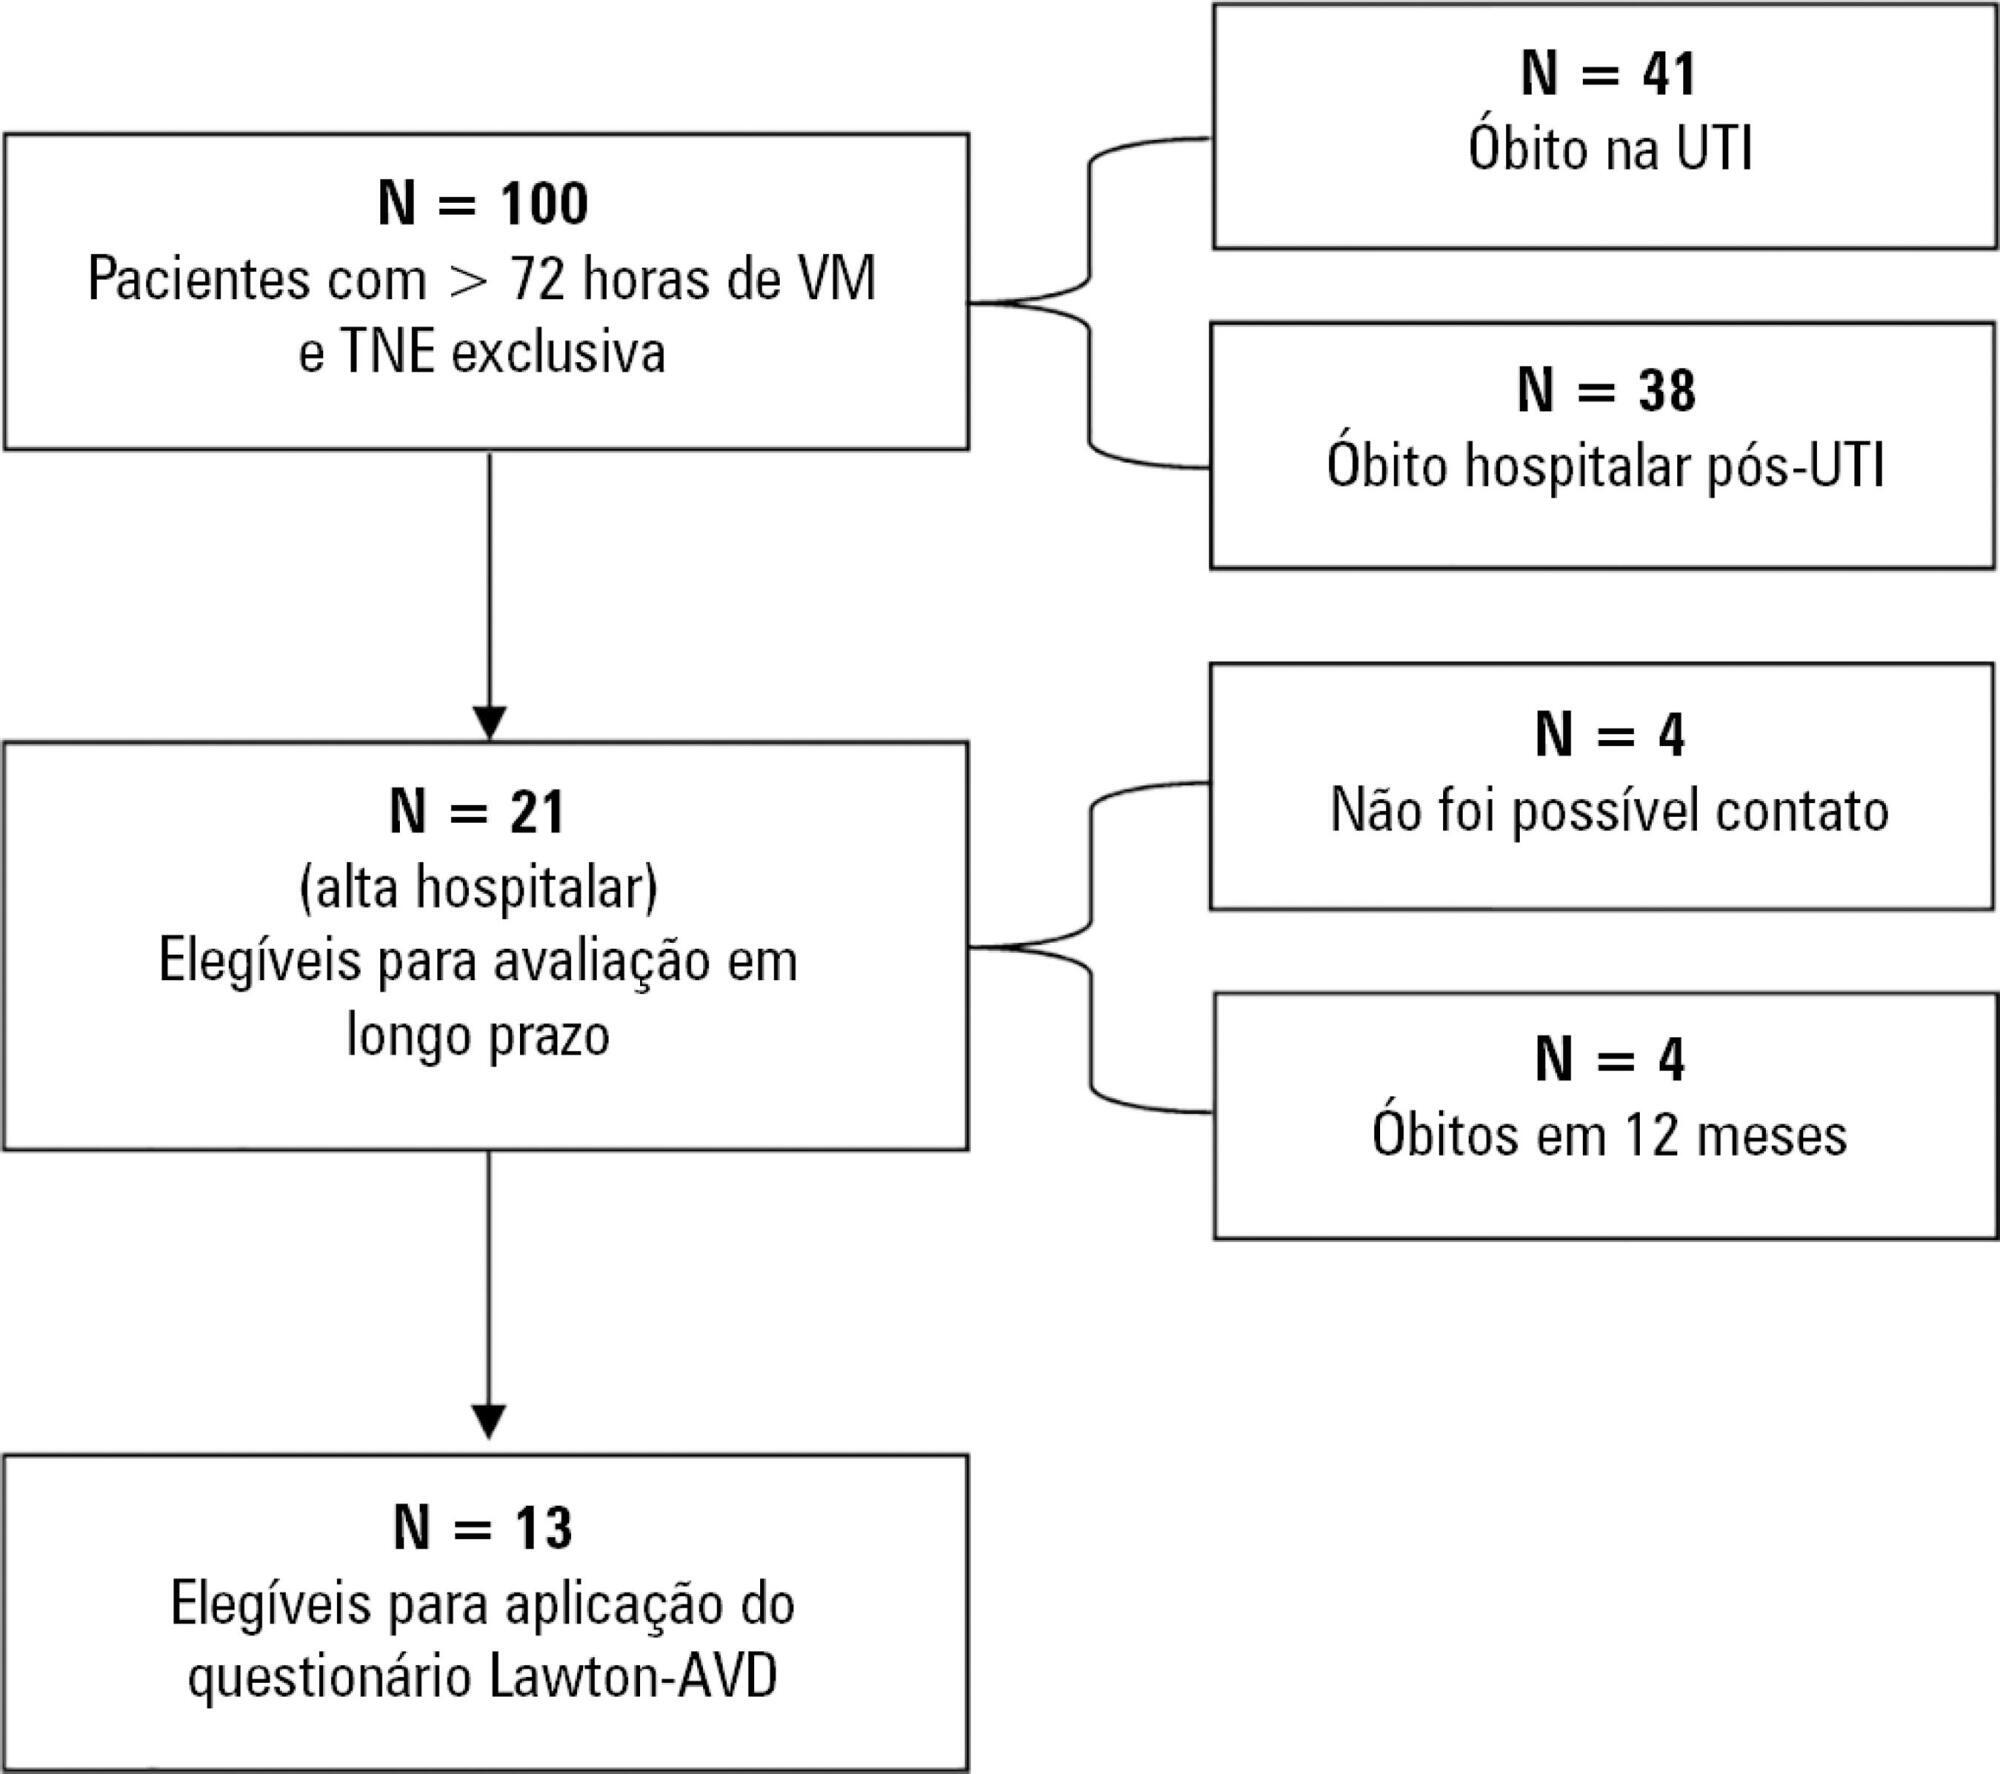 Adequacy of enteral nutritional support in intensive care units does not affect the short- and long-term prognosis of mechanically ventilated patients: a pilot study